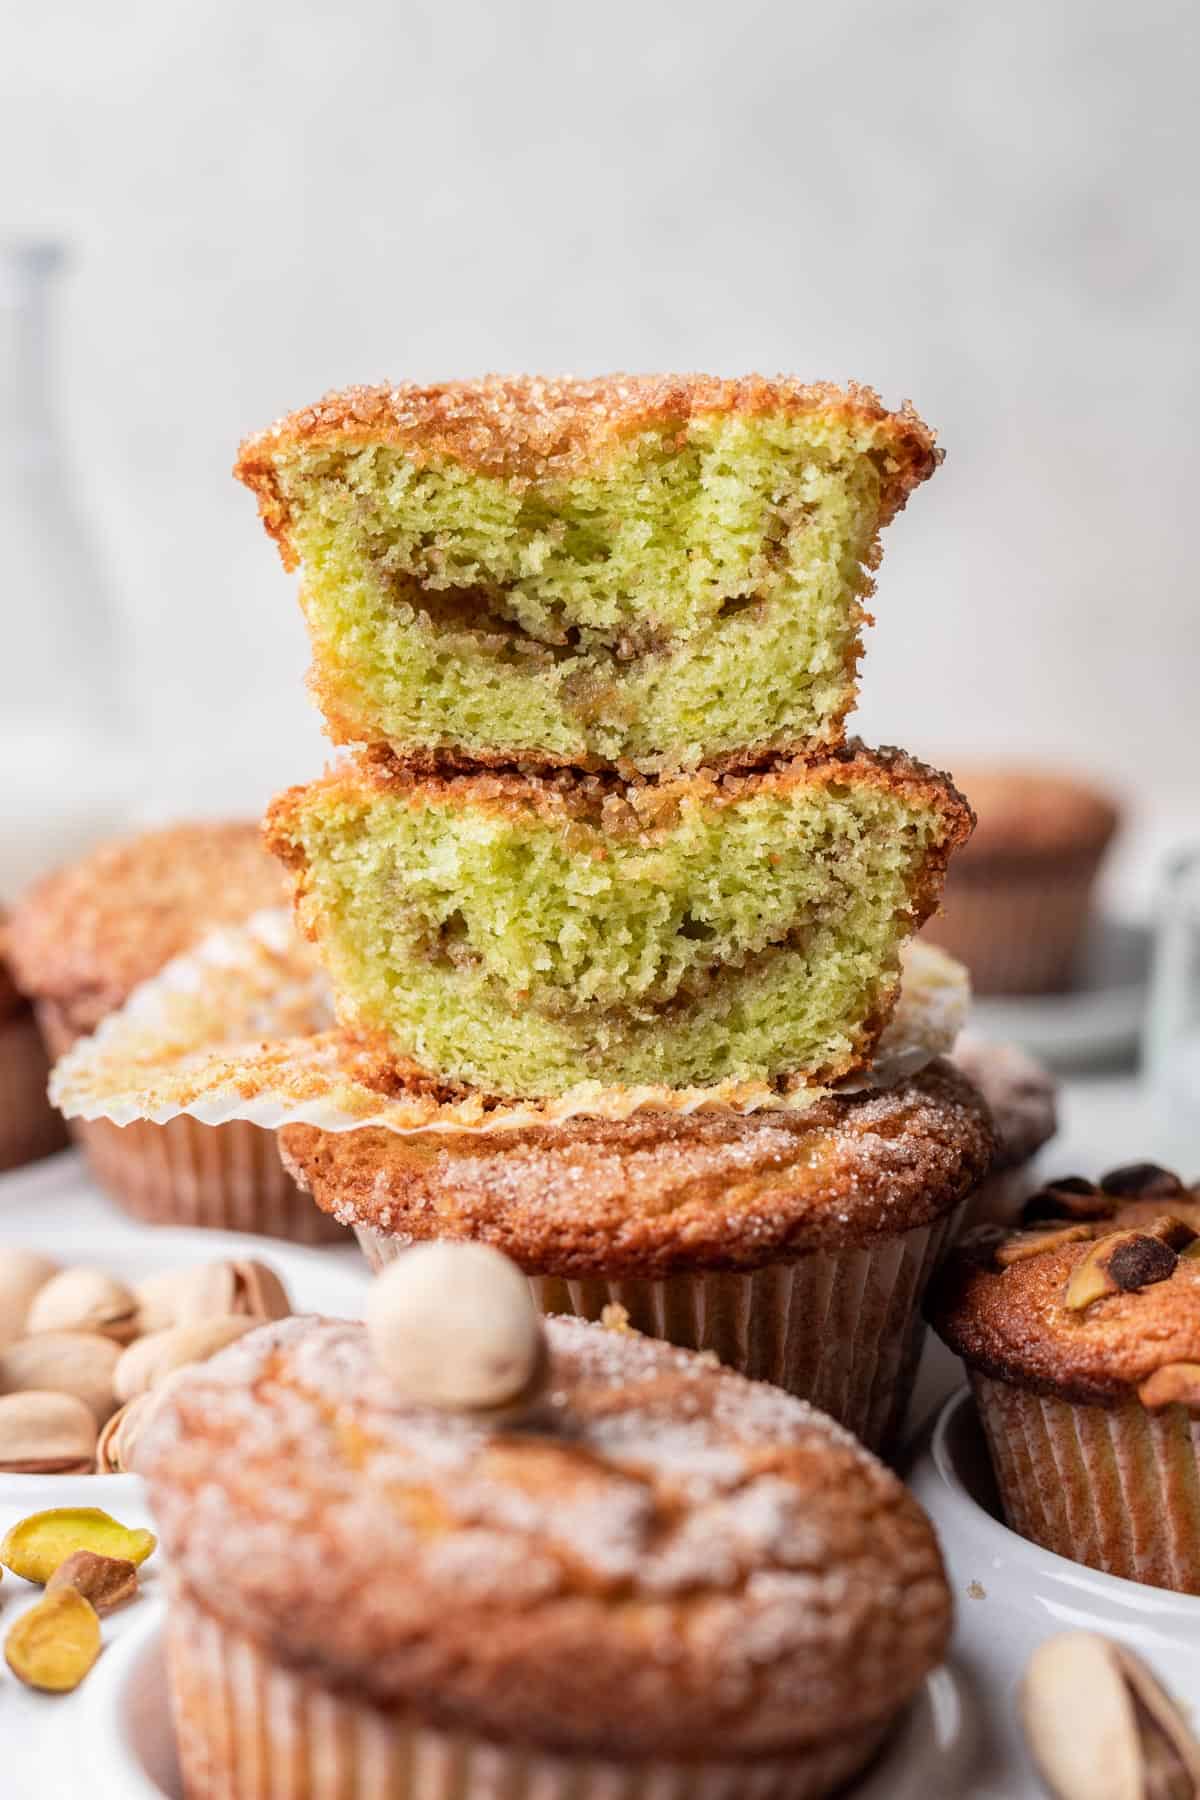 2 pistachio muffins cut in half and stacked on top of one another to show the cinnamon swirl in the middle.